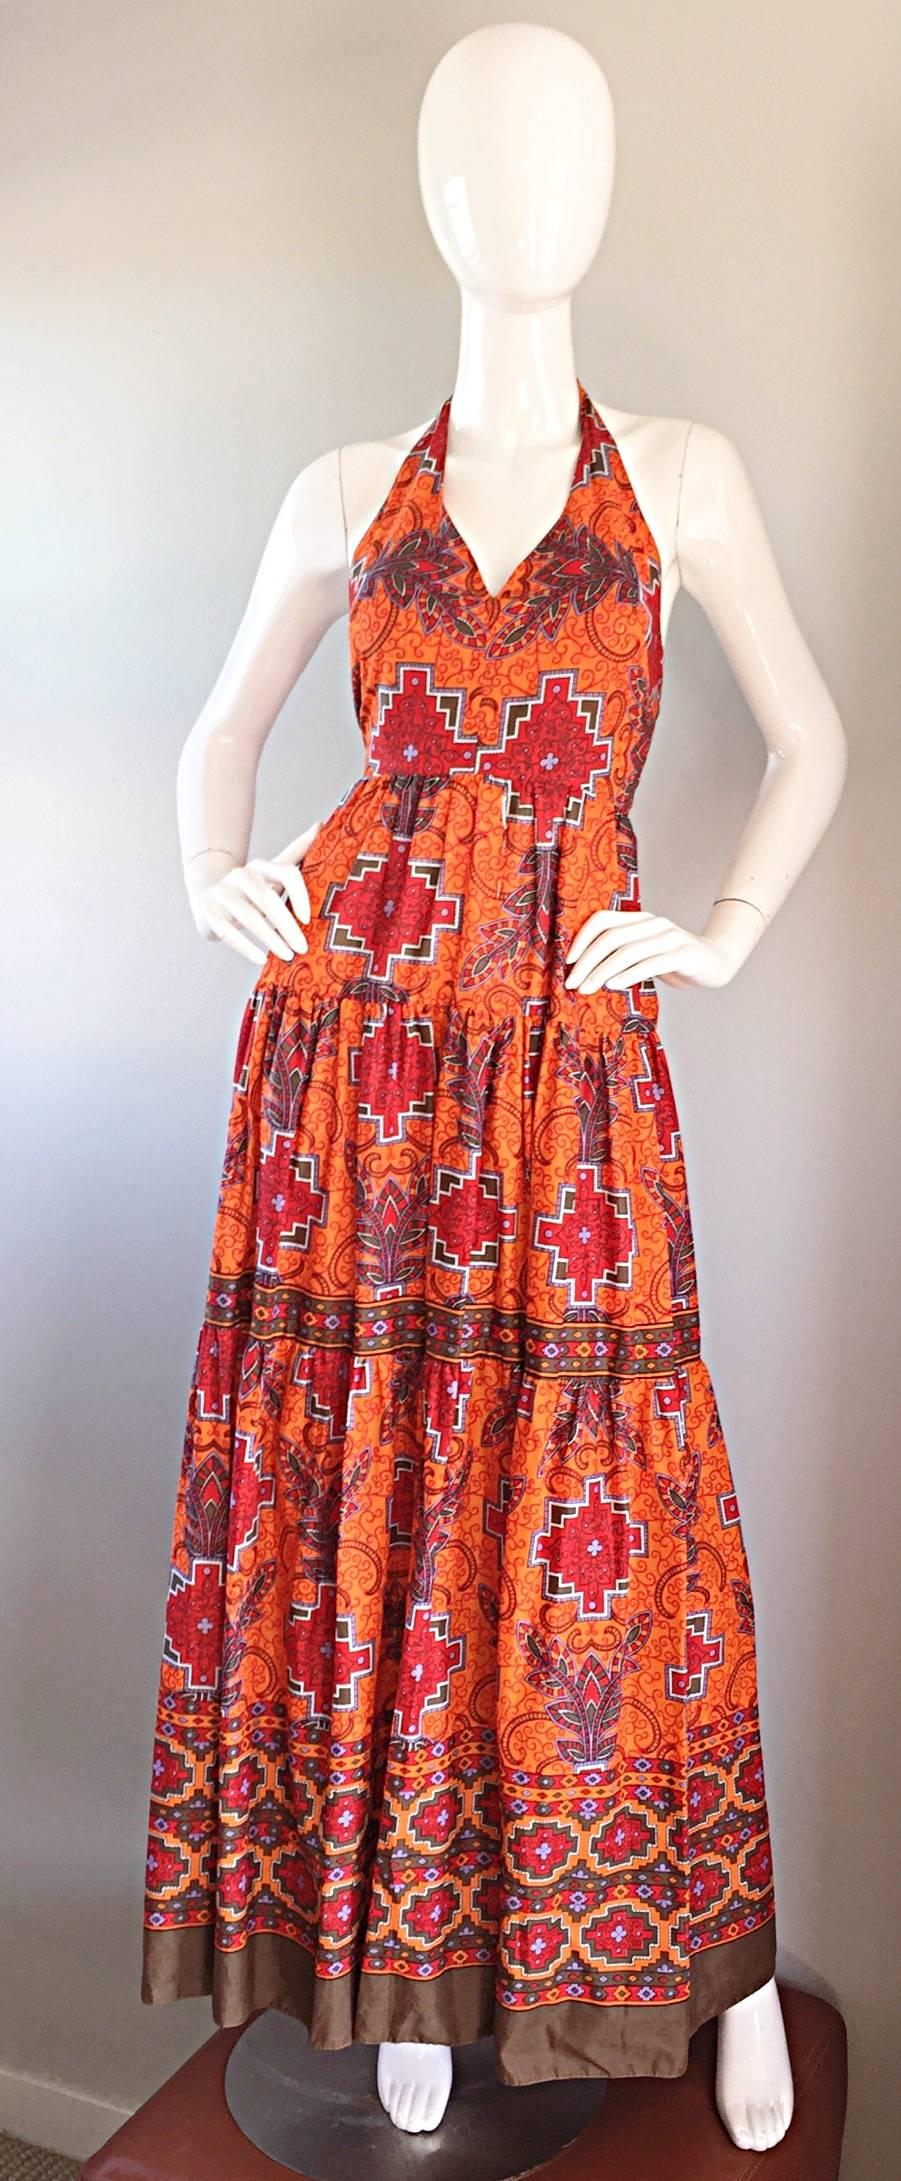 Fantastic vintage FRANK USHER 70s lightweight cotton maxi halter dress! Amazing tribal / southwestern / ethnic print throughout. Burnt orange background, with contrasting multicolored prints throughout. Metal zipper up the back, with hook-and-eye